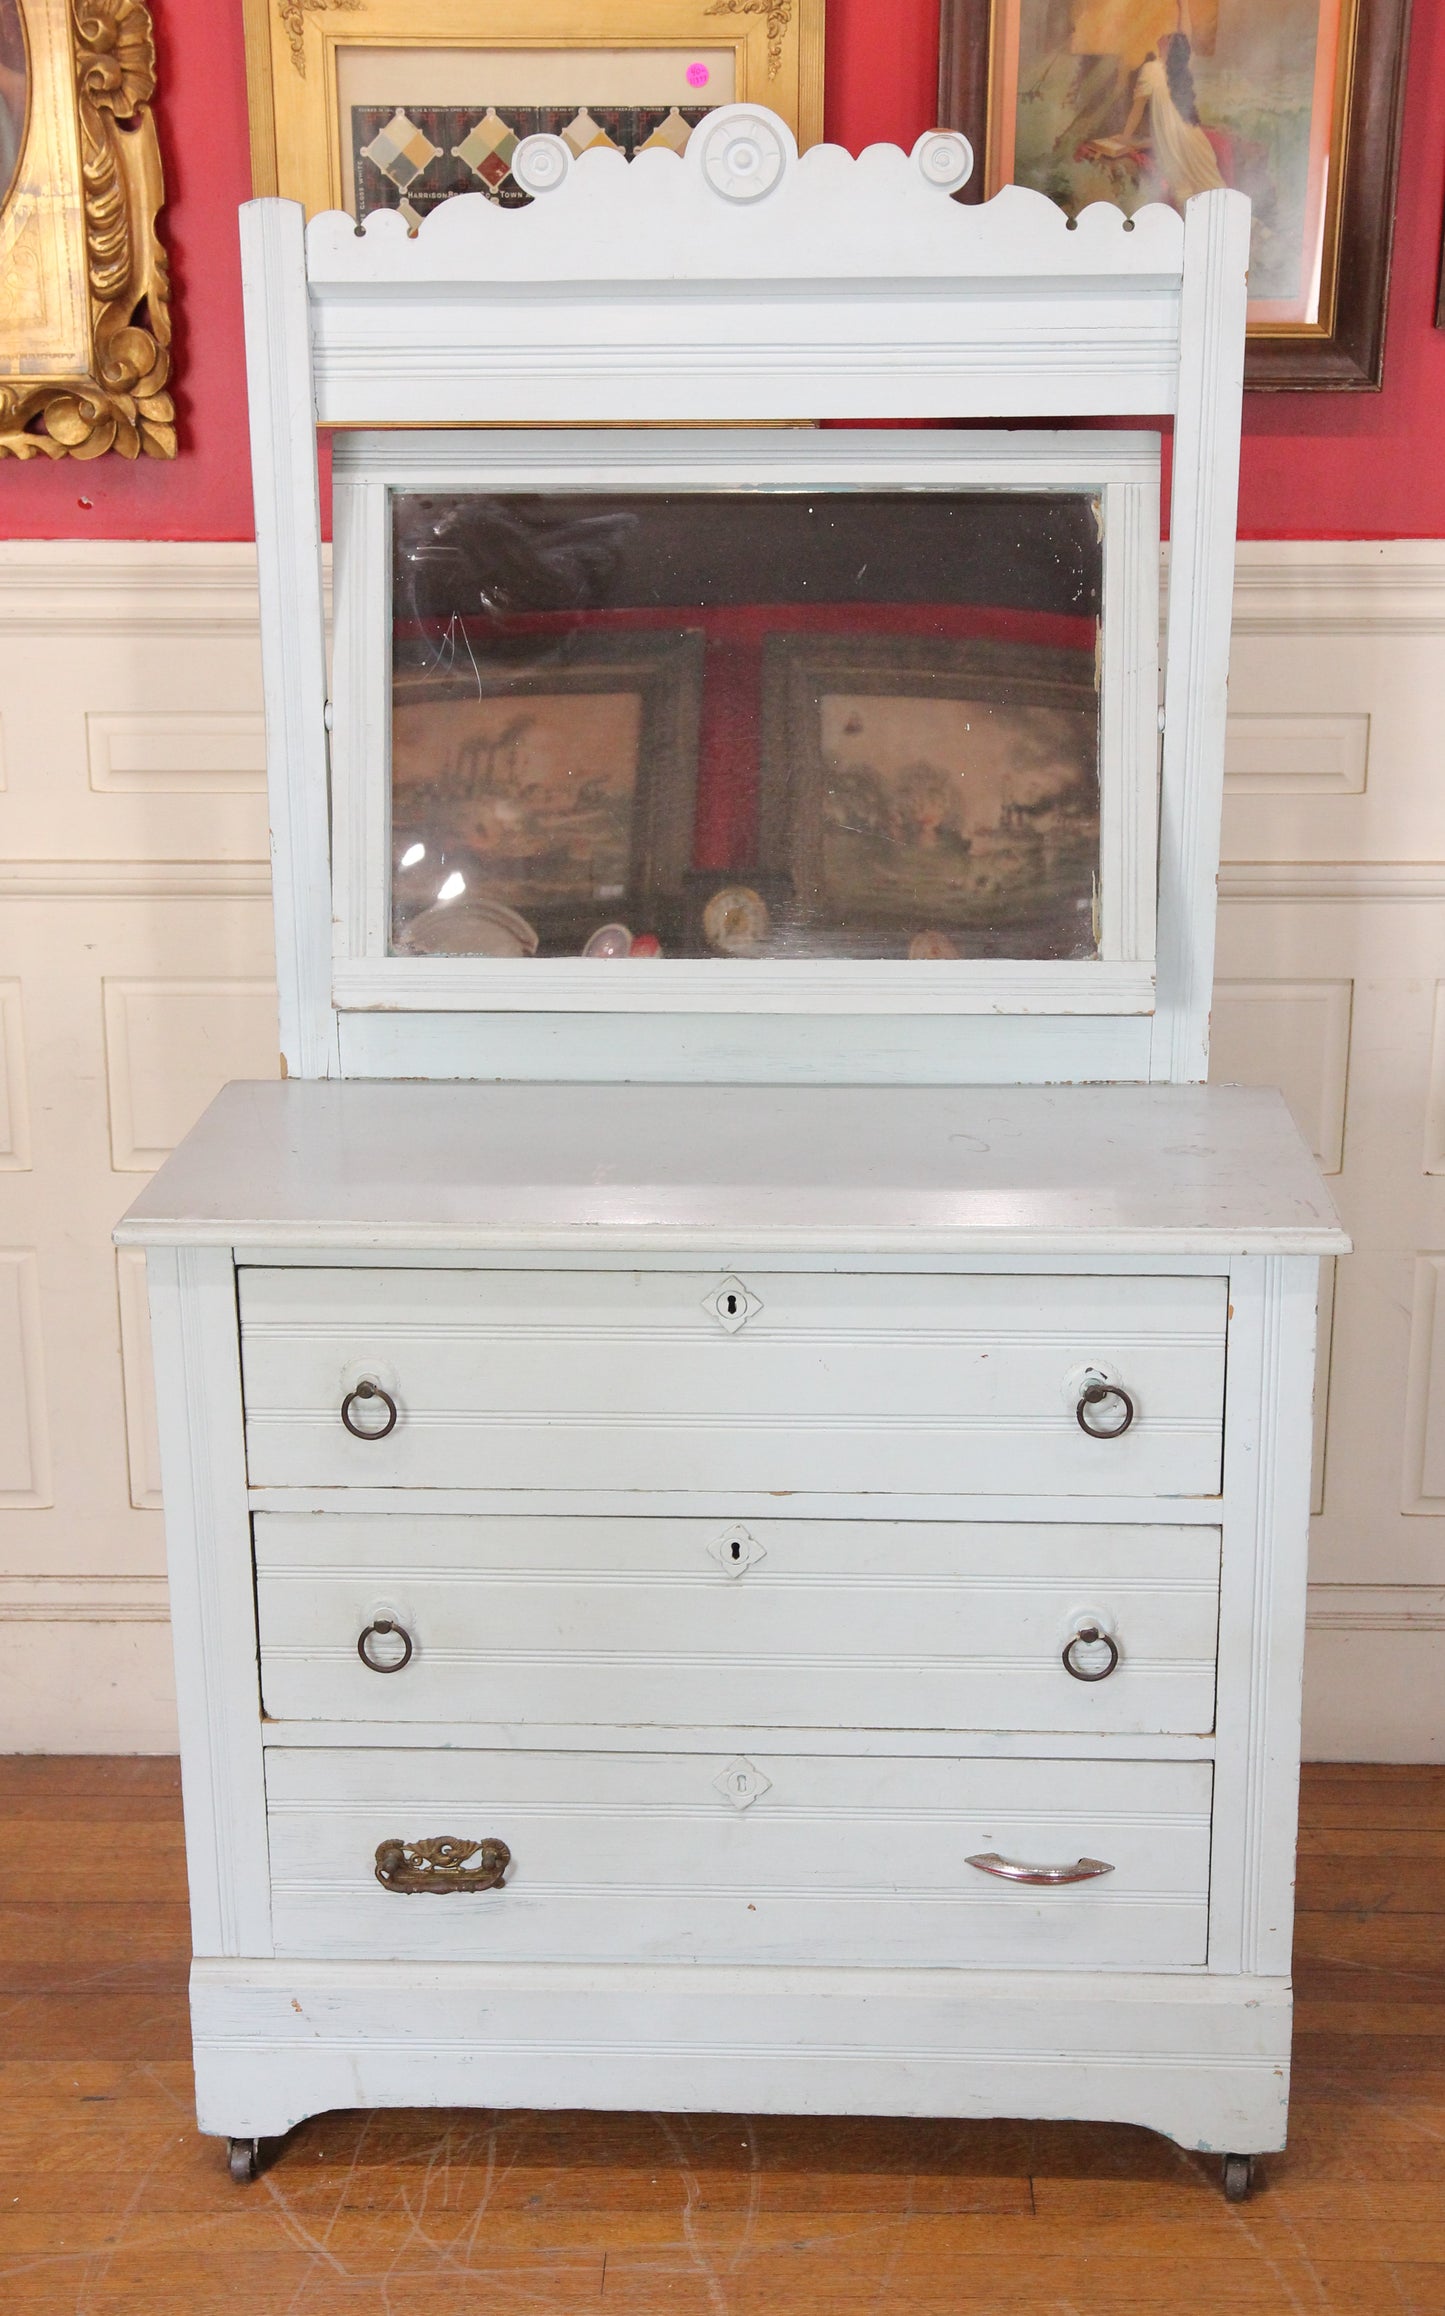 Shabby Child's Three Drawer Dresser with Swing Mirror and Light Blue Paint